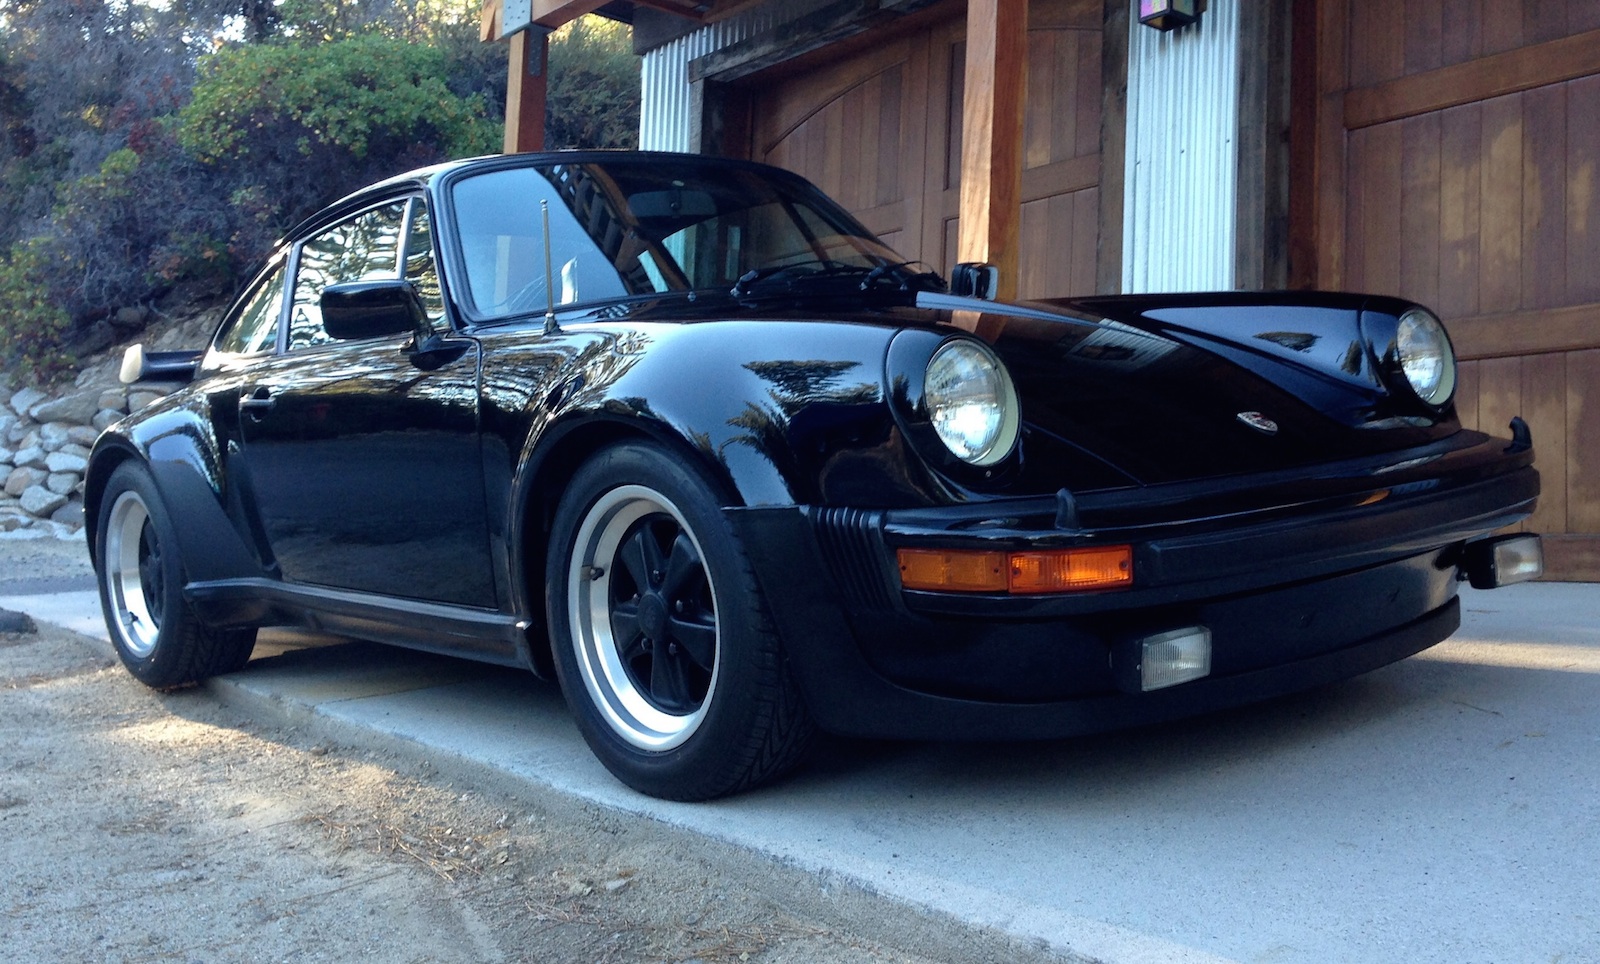 This Porsche 930 Turbo Carerra For Sale In Monterey Should Do Well